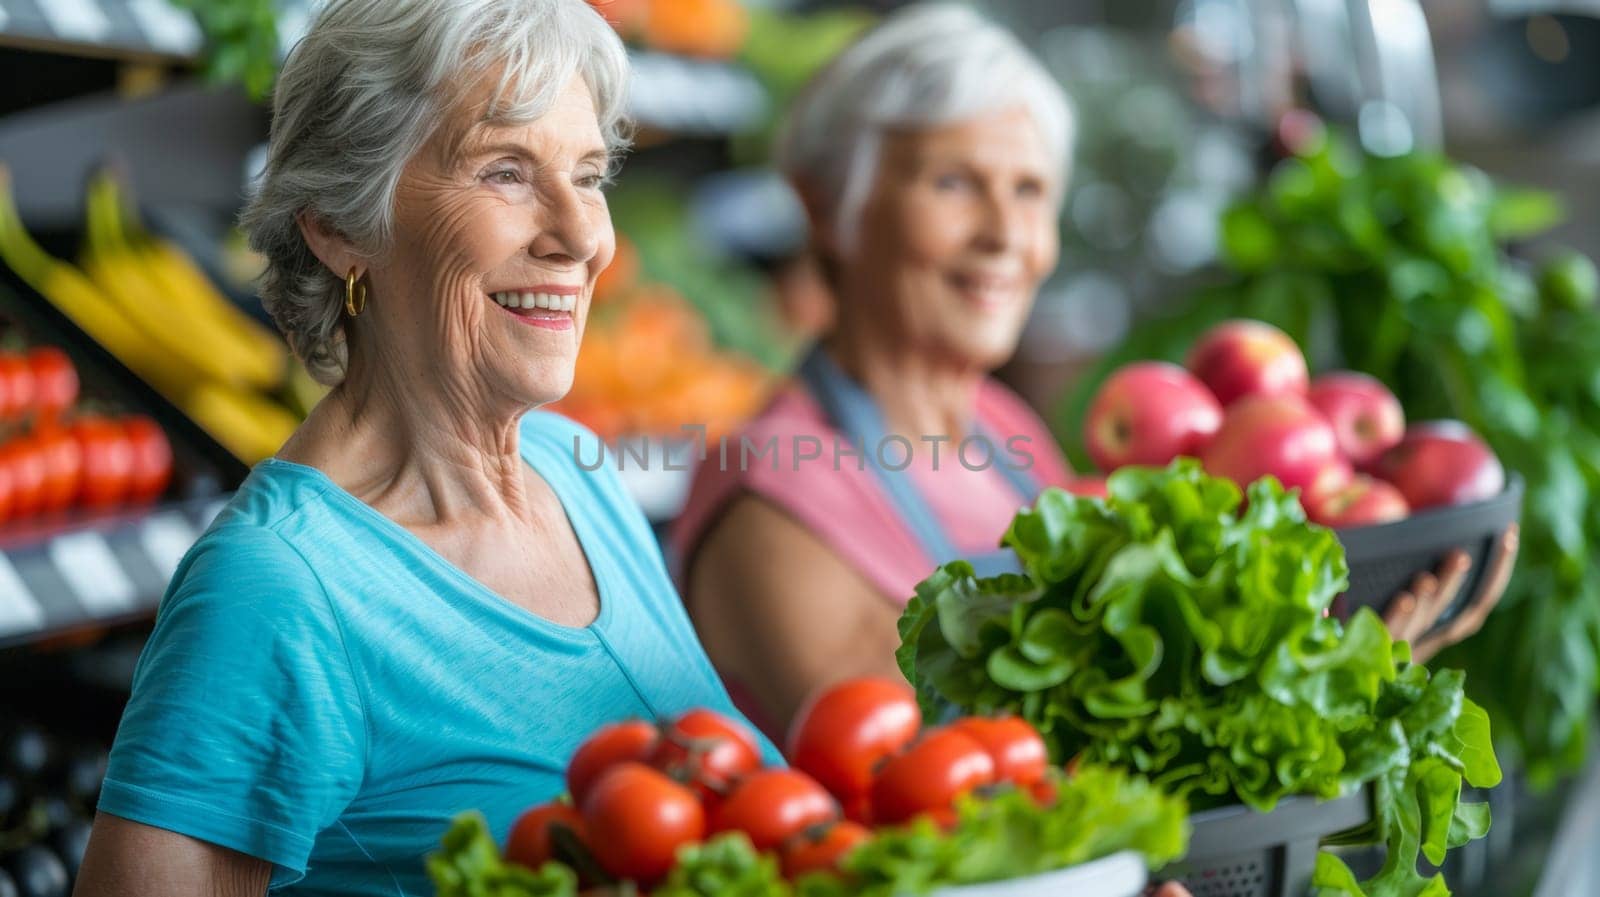 Two women in a grocery store holding baskets of fresh produce, AI by starush